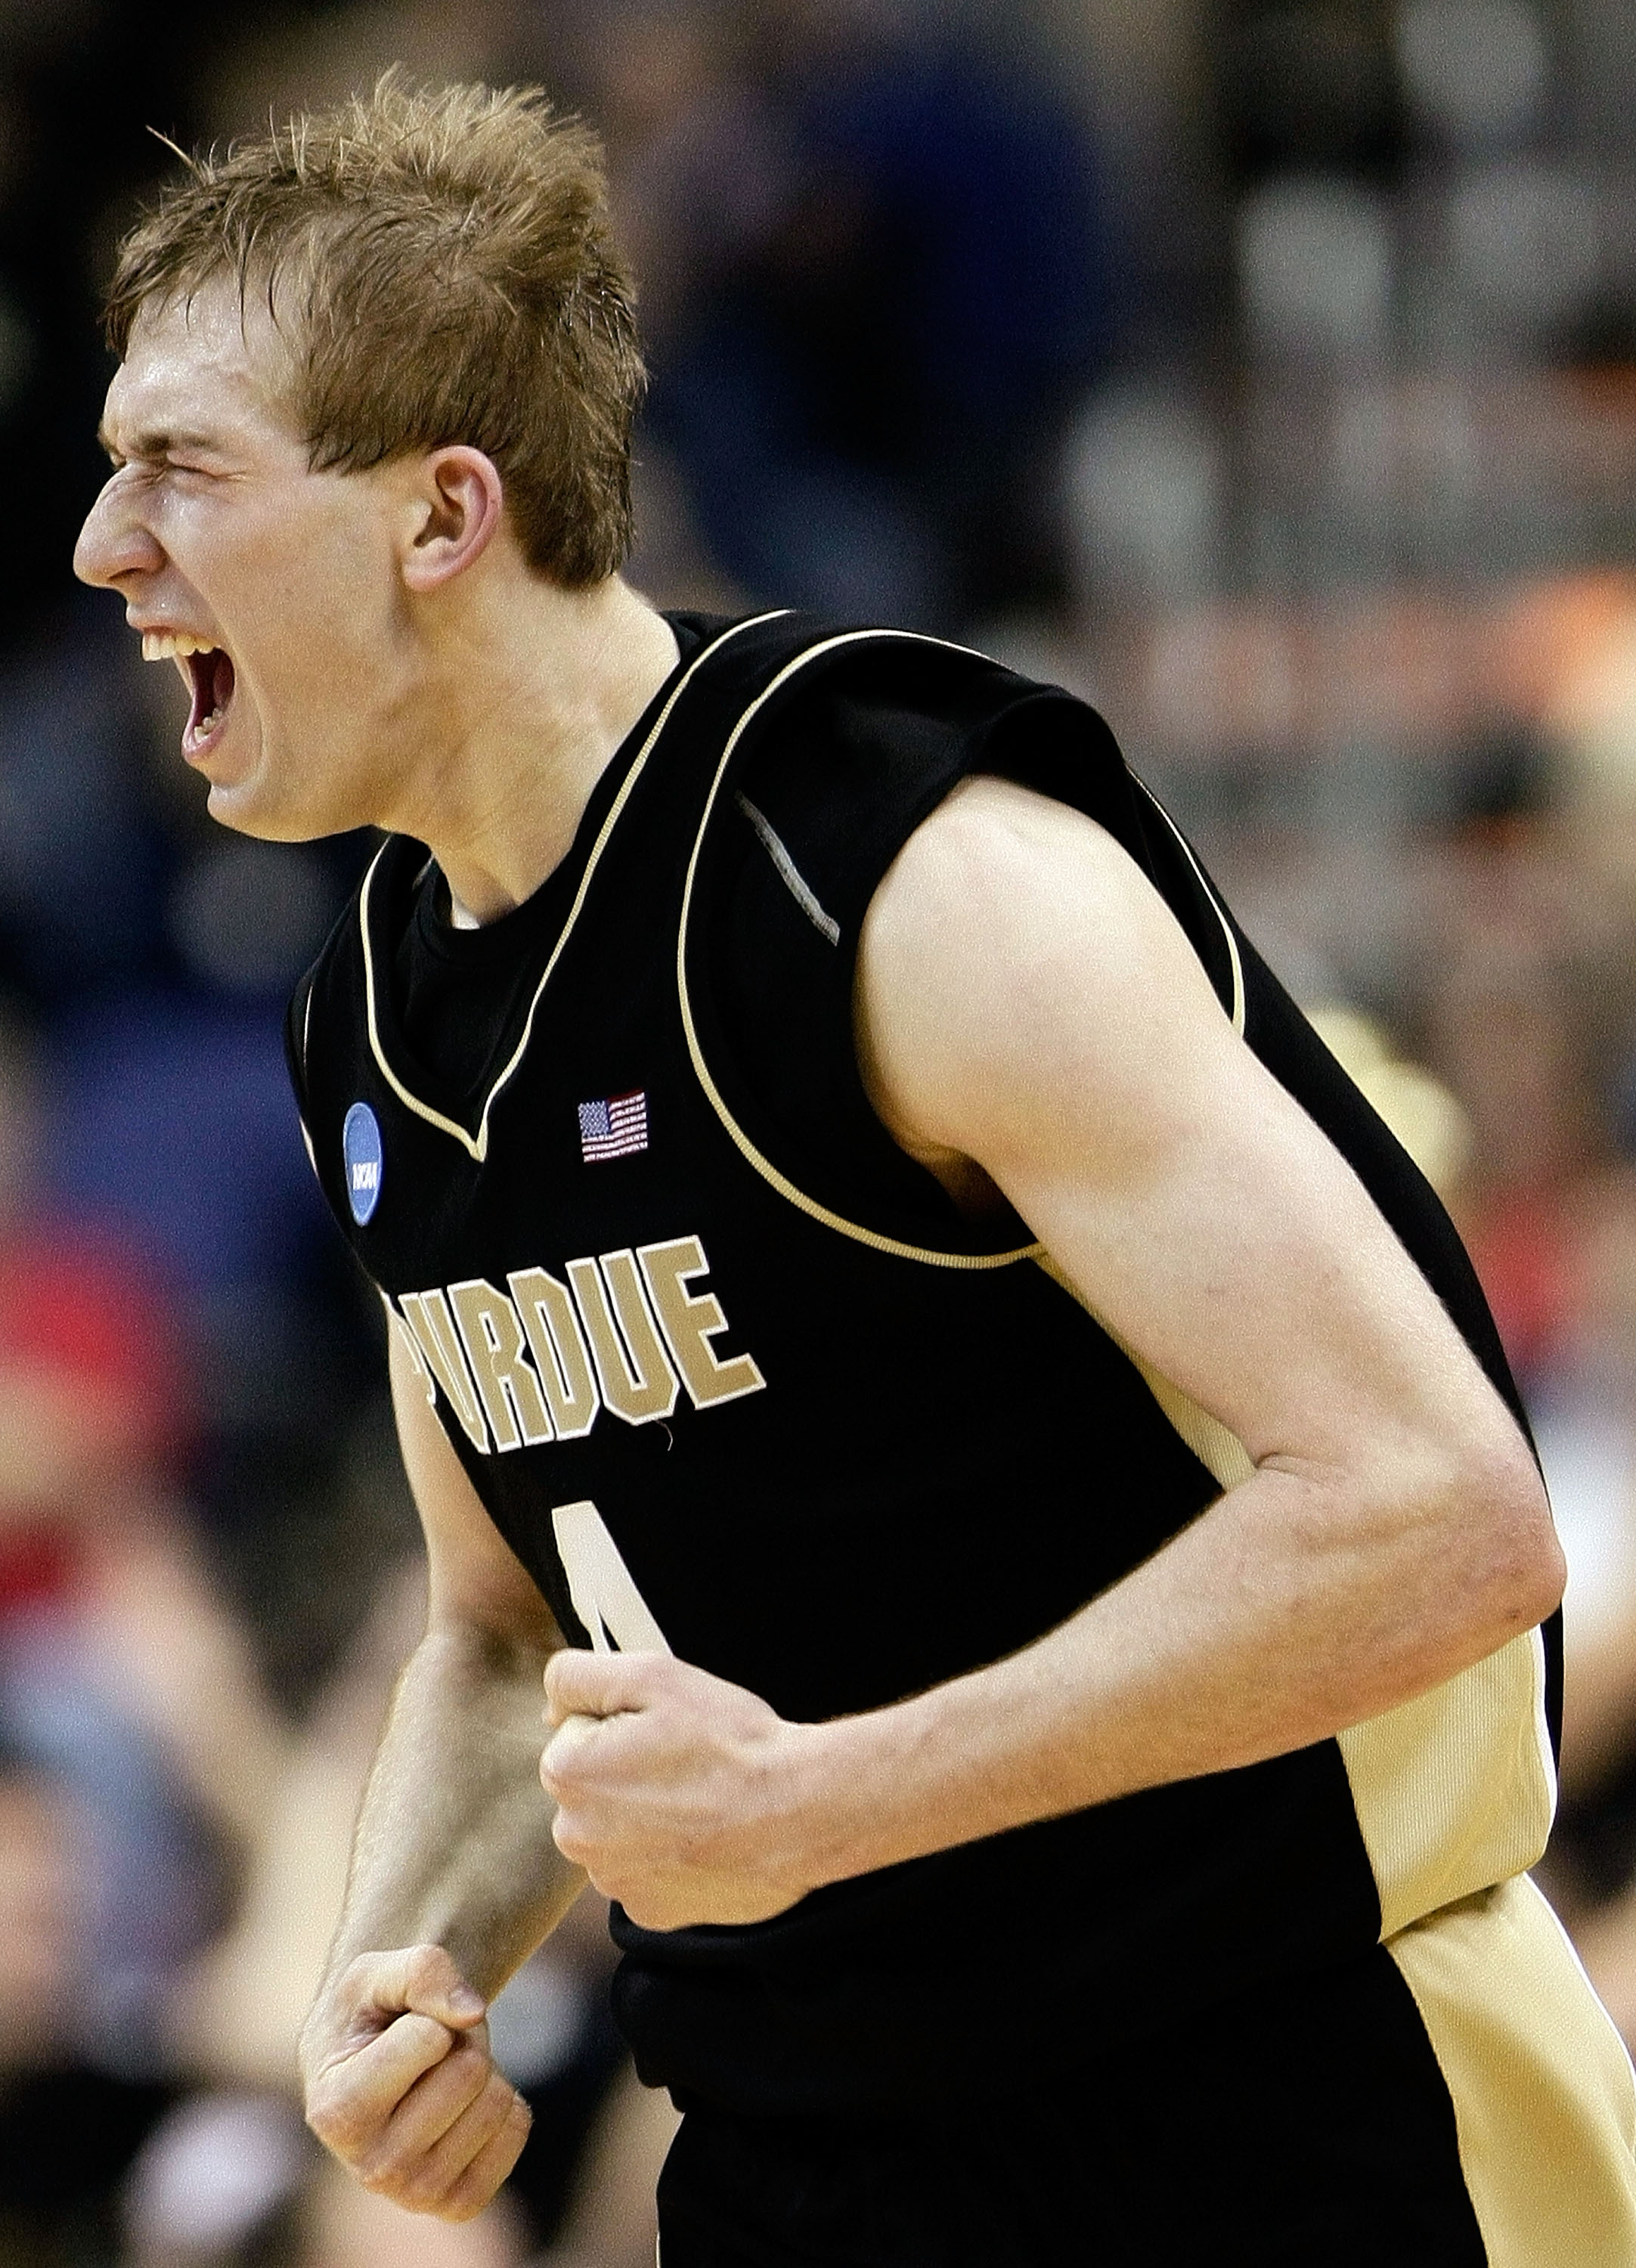 WASHINGTON - MARCH 22:  Robbie Hummel #4 of the Purdue Boilermakers reacts after hitting a shot against the Xavier Musketeers during the second round of the West Regional as part of the 2008 NCAA Men's Basketball Tournament at the Verizon Center on March 